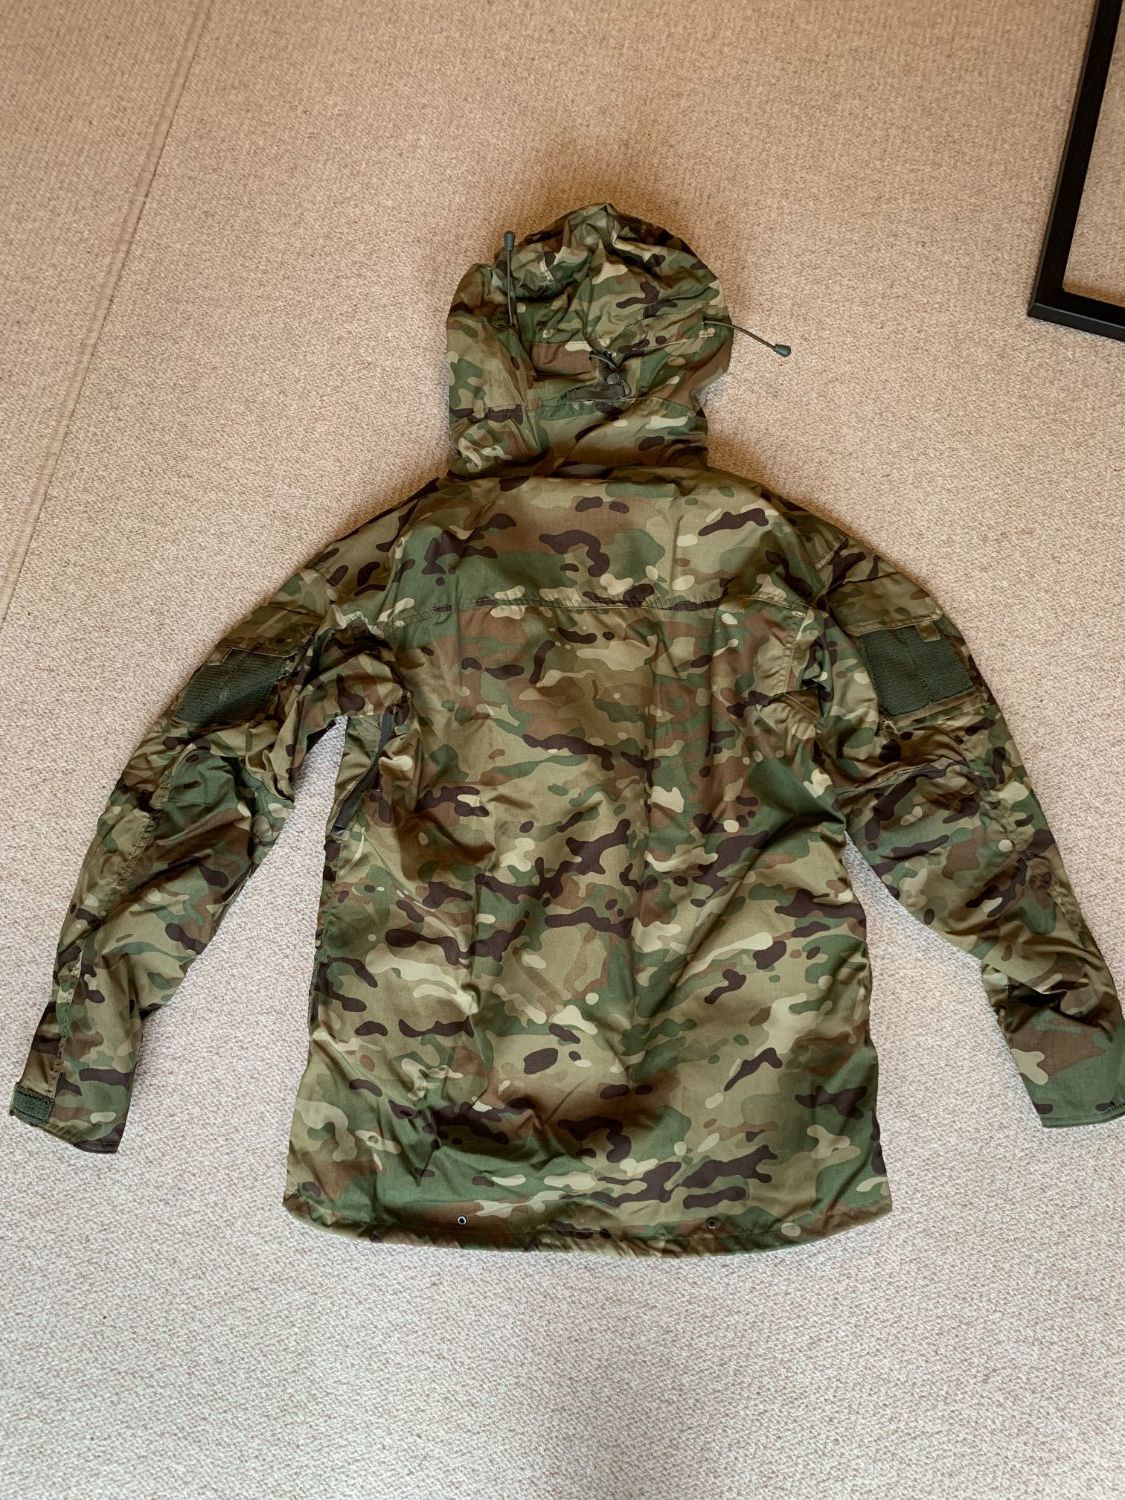 UKSF Taiga CPA-08 Goretex Field Jacket Large - Gear - Airsoft Forums UK